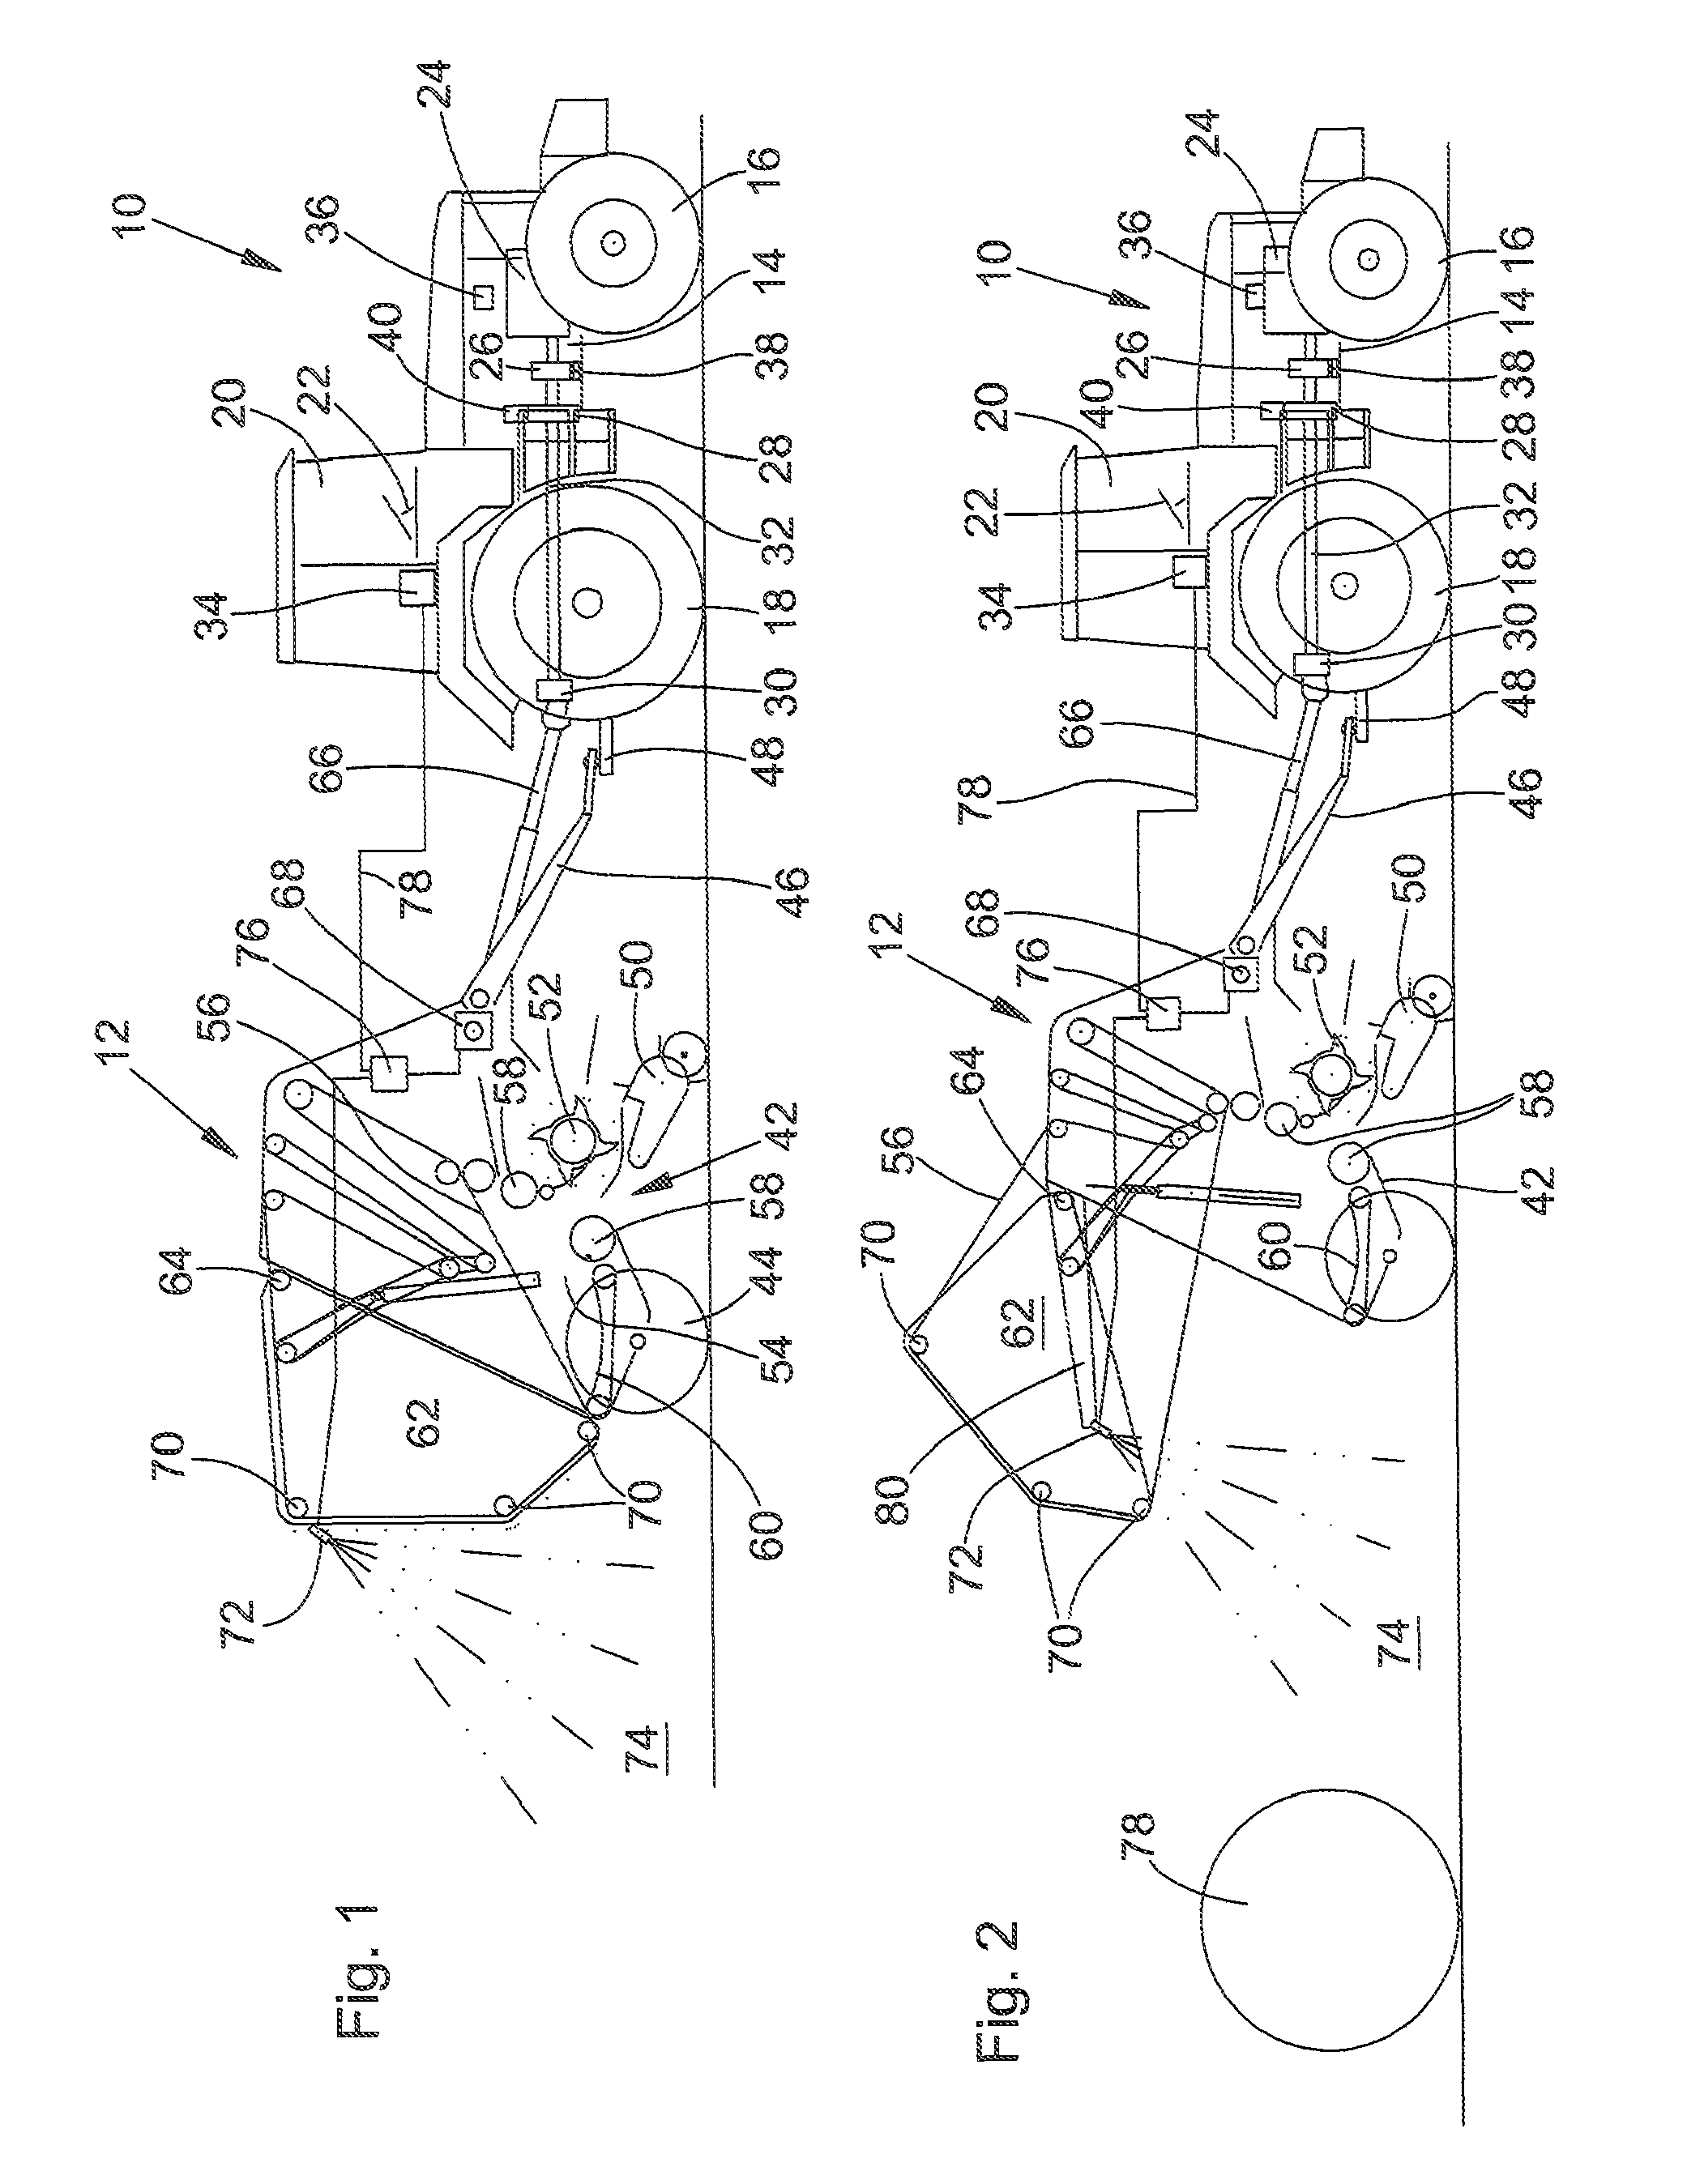 Combination agricultural apparatus and towing vehicle with a safety feature